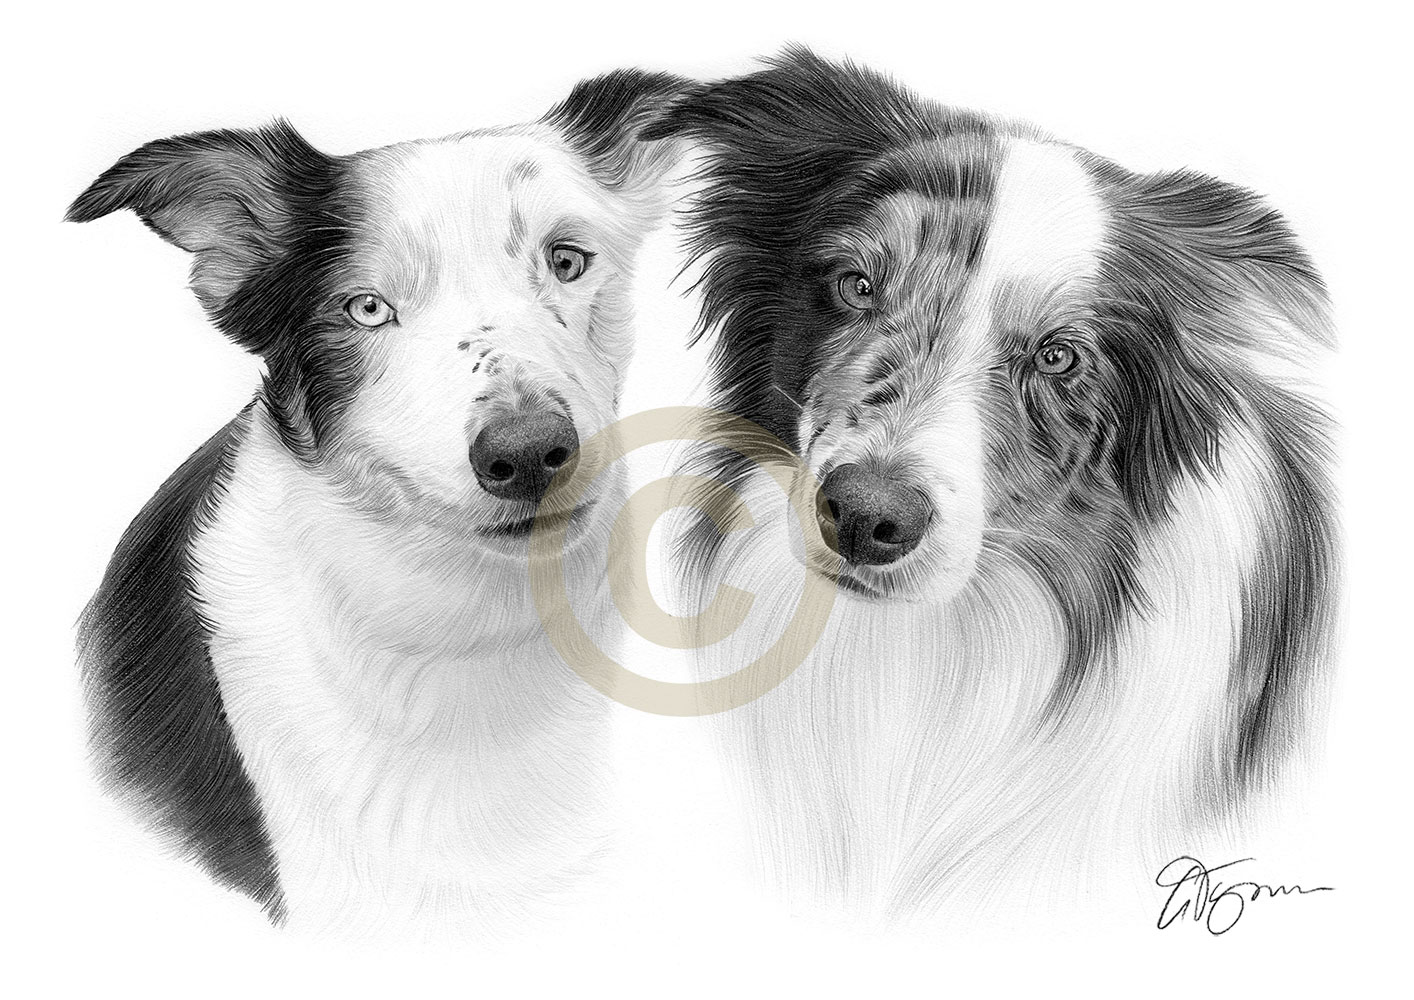 Pet portrait commission of two blue merle border collies called Juno and Ollie by artist Gary Tymon